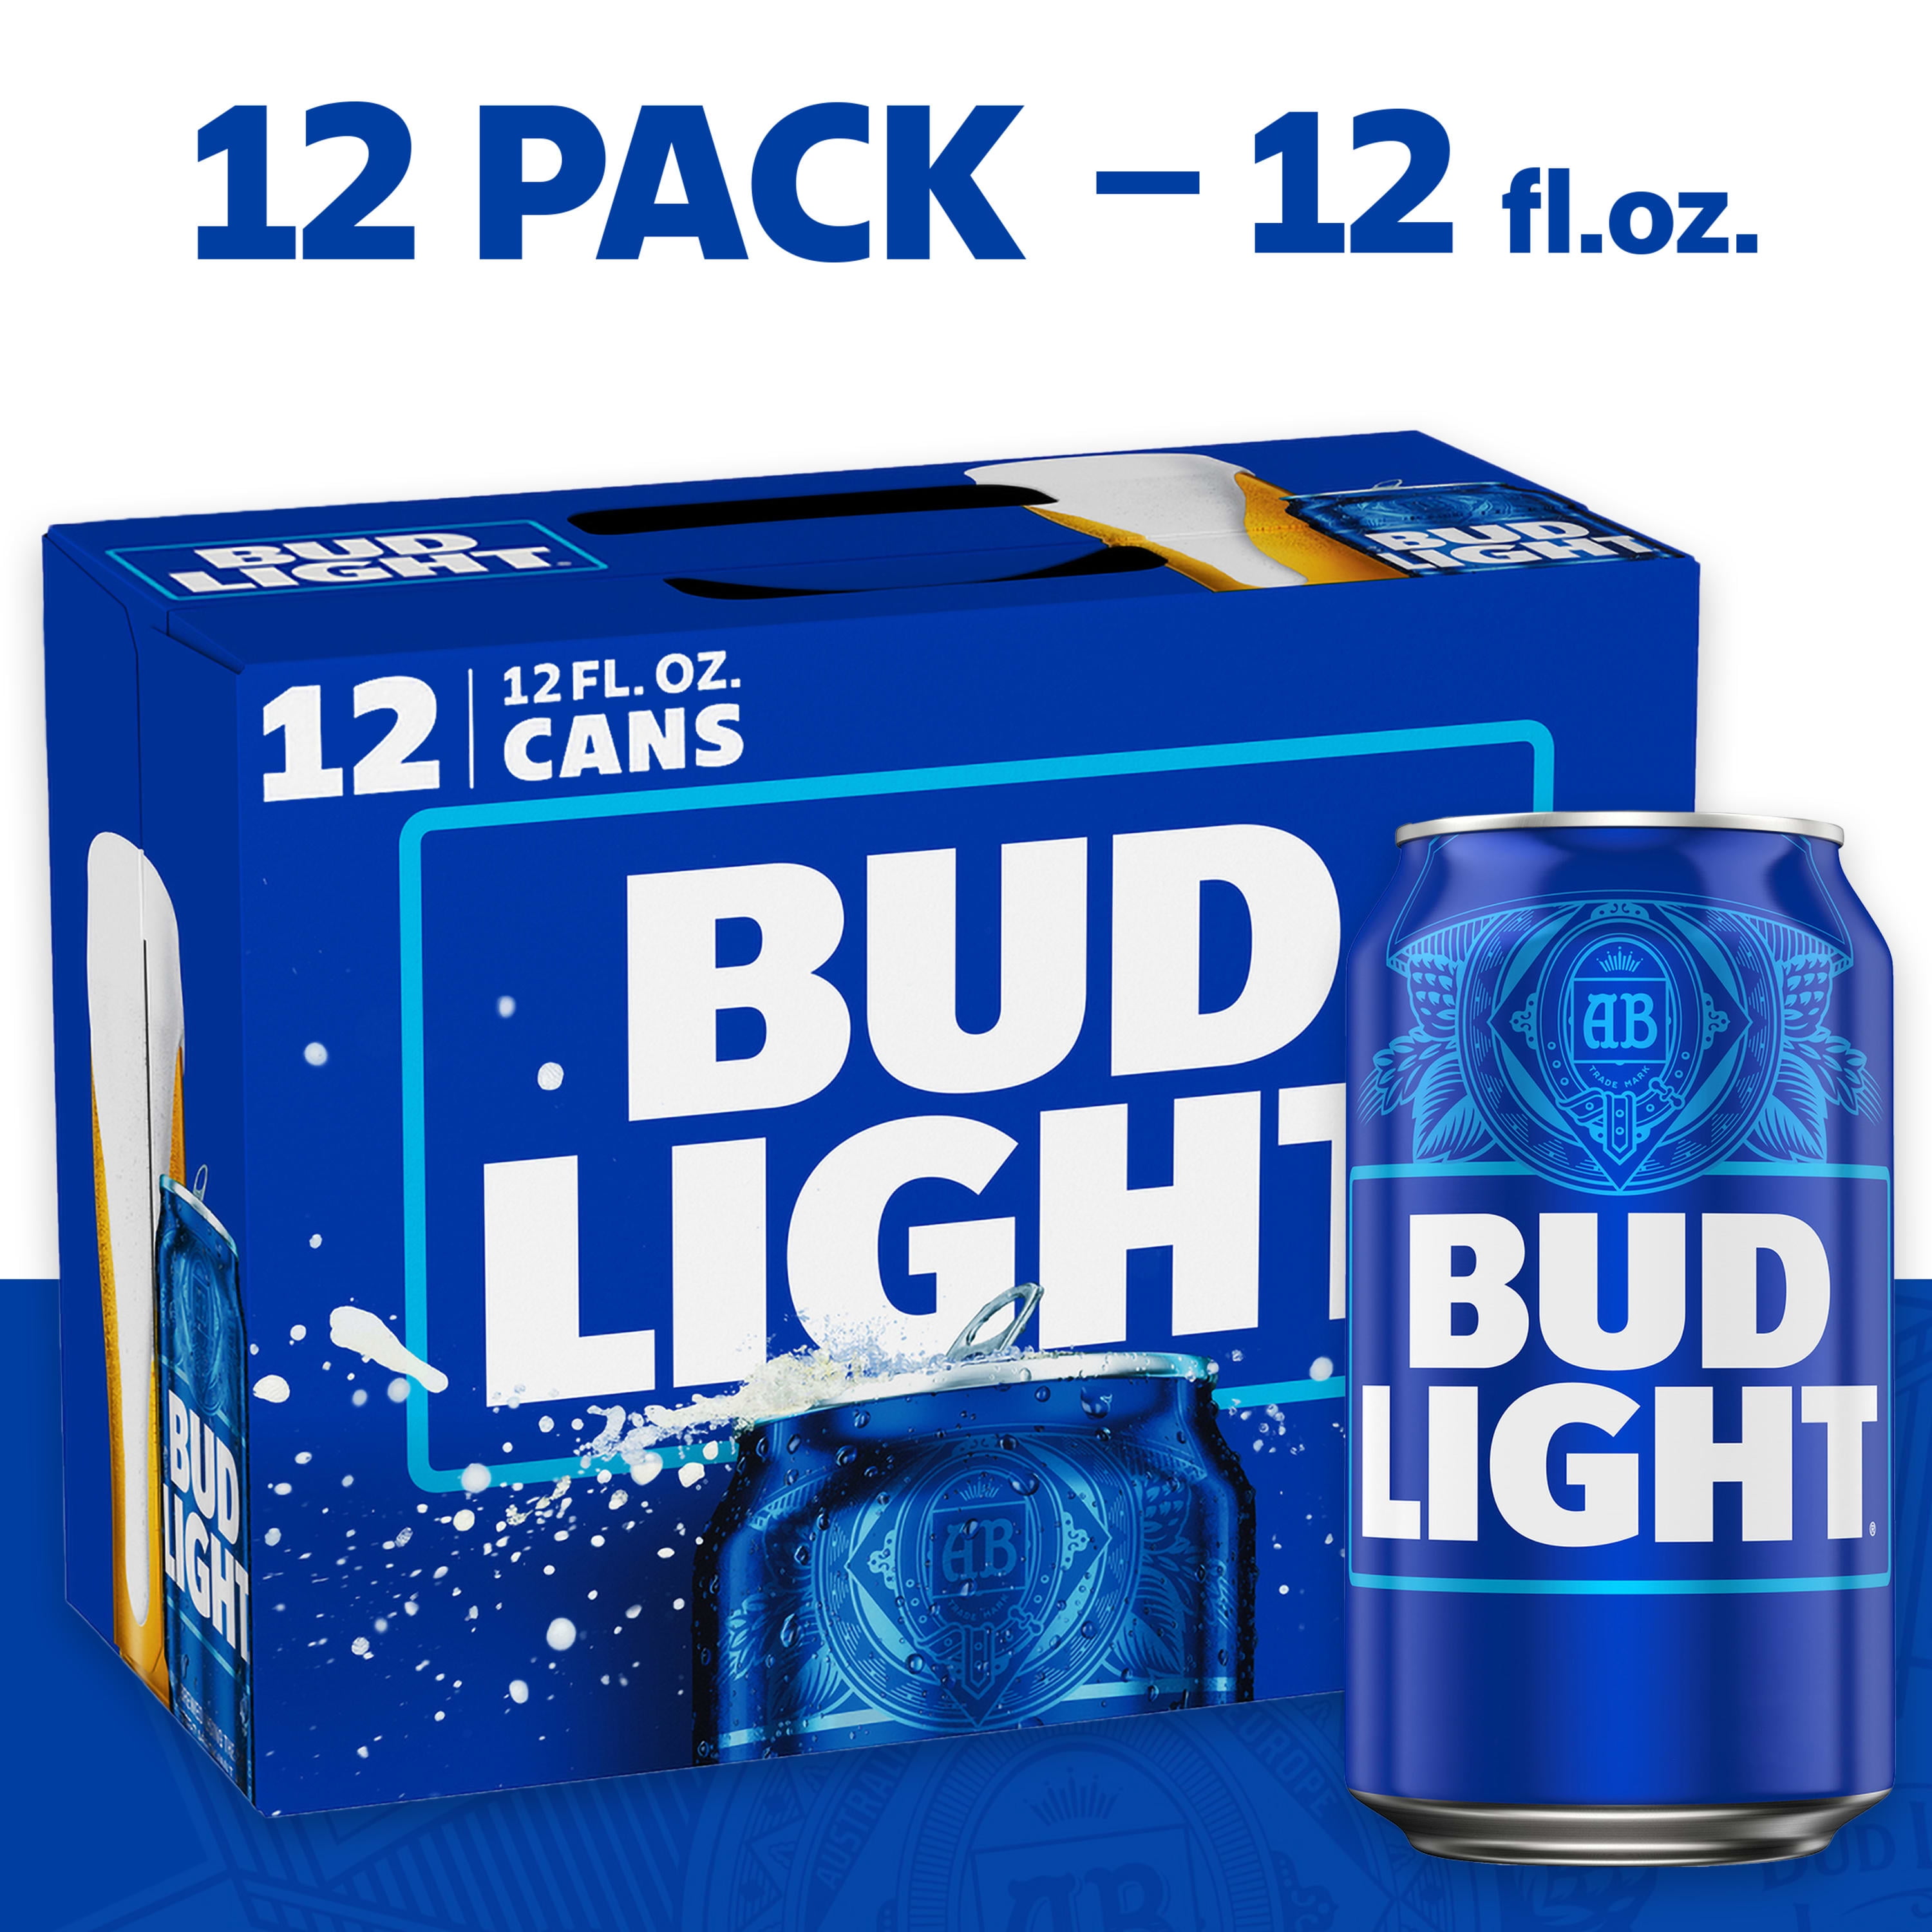 Details about   Bud Light Aluminum Beer Bottle #503013 Chicago lollapalooza CUBS empty 16oz 